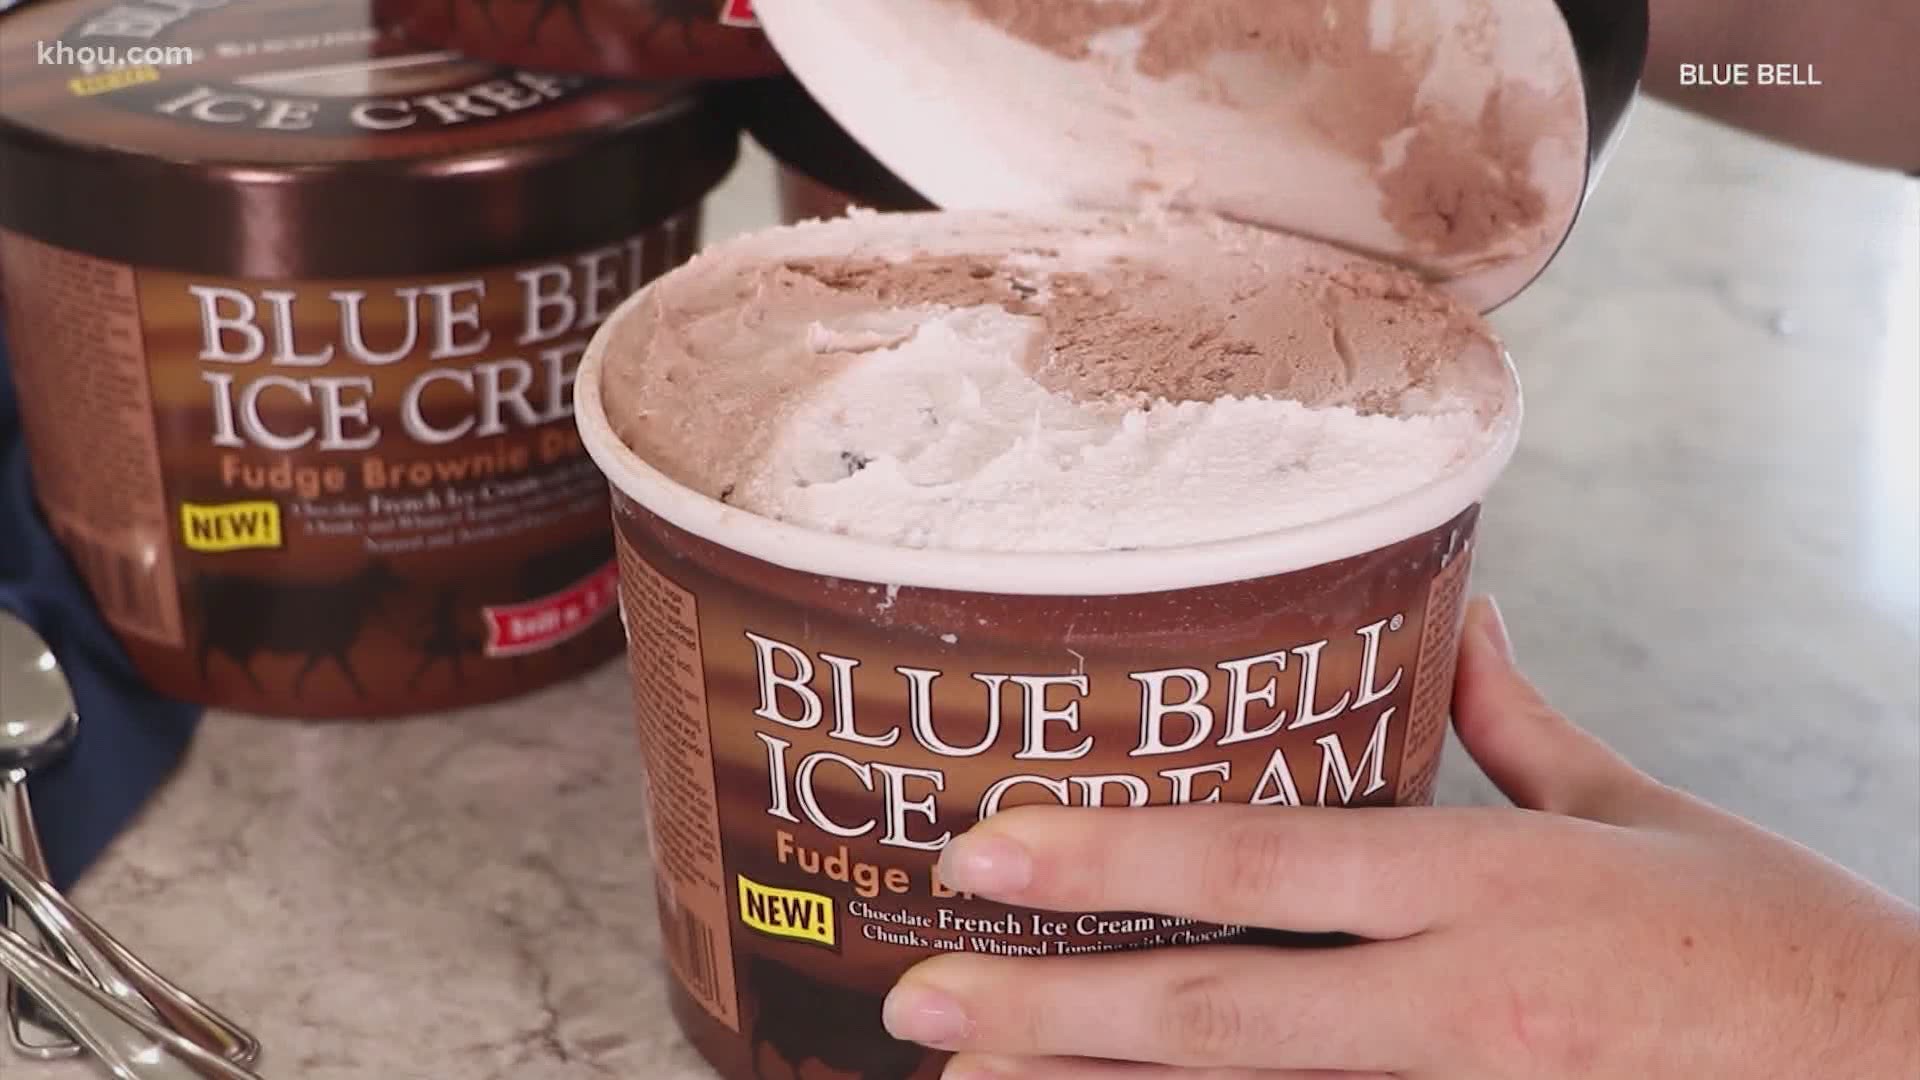 Blue Bell has just released its newest flavor -- Fudge Brownie Decadence. The company said this new flavor is the "smoothest" they've ever created.